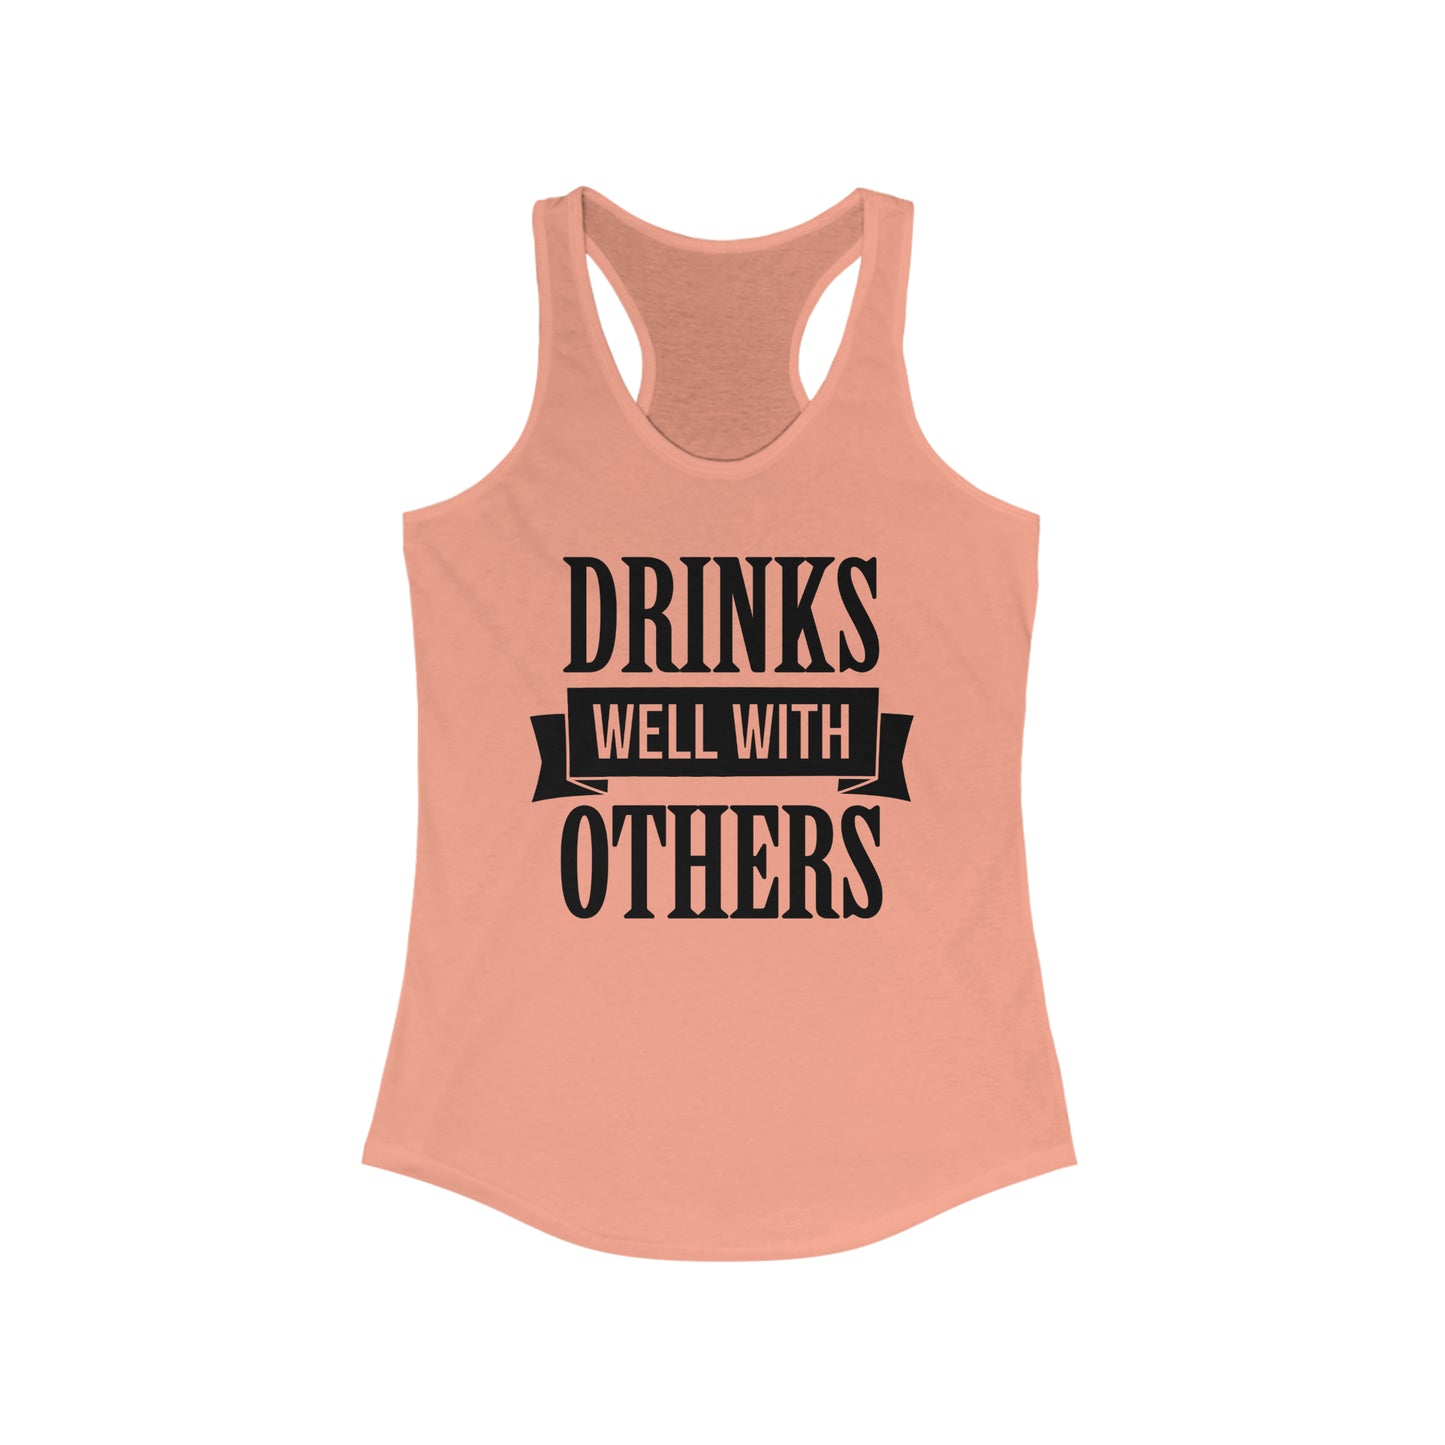 Drinks Well With Others Tank Top Women's Ideal Racerback Tank